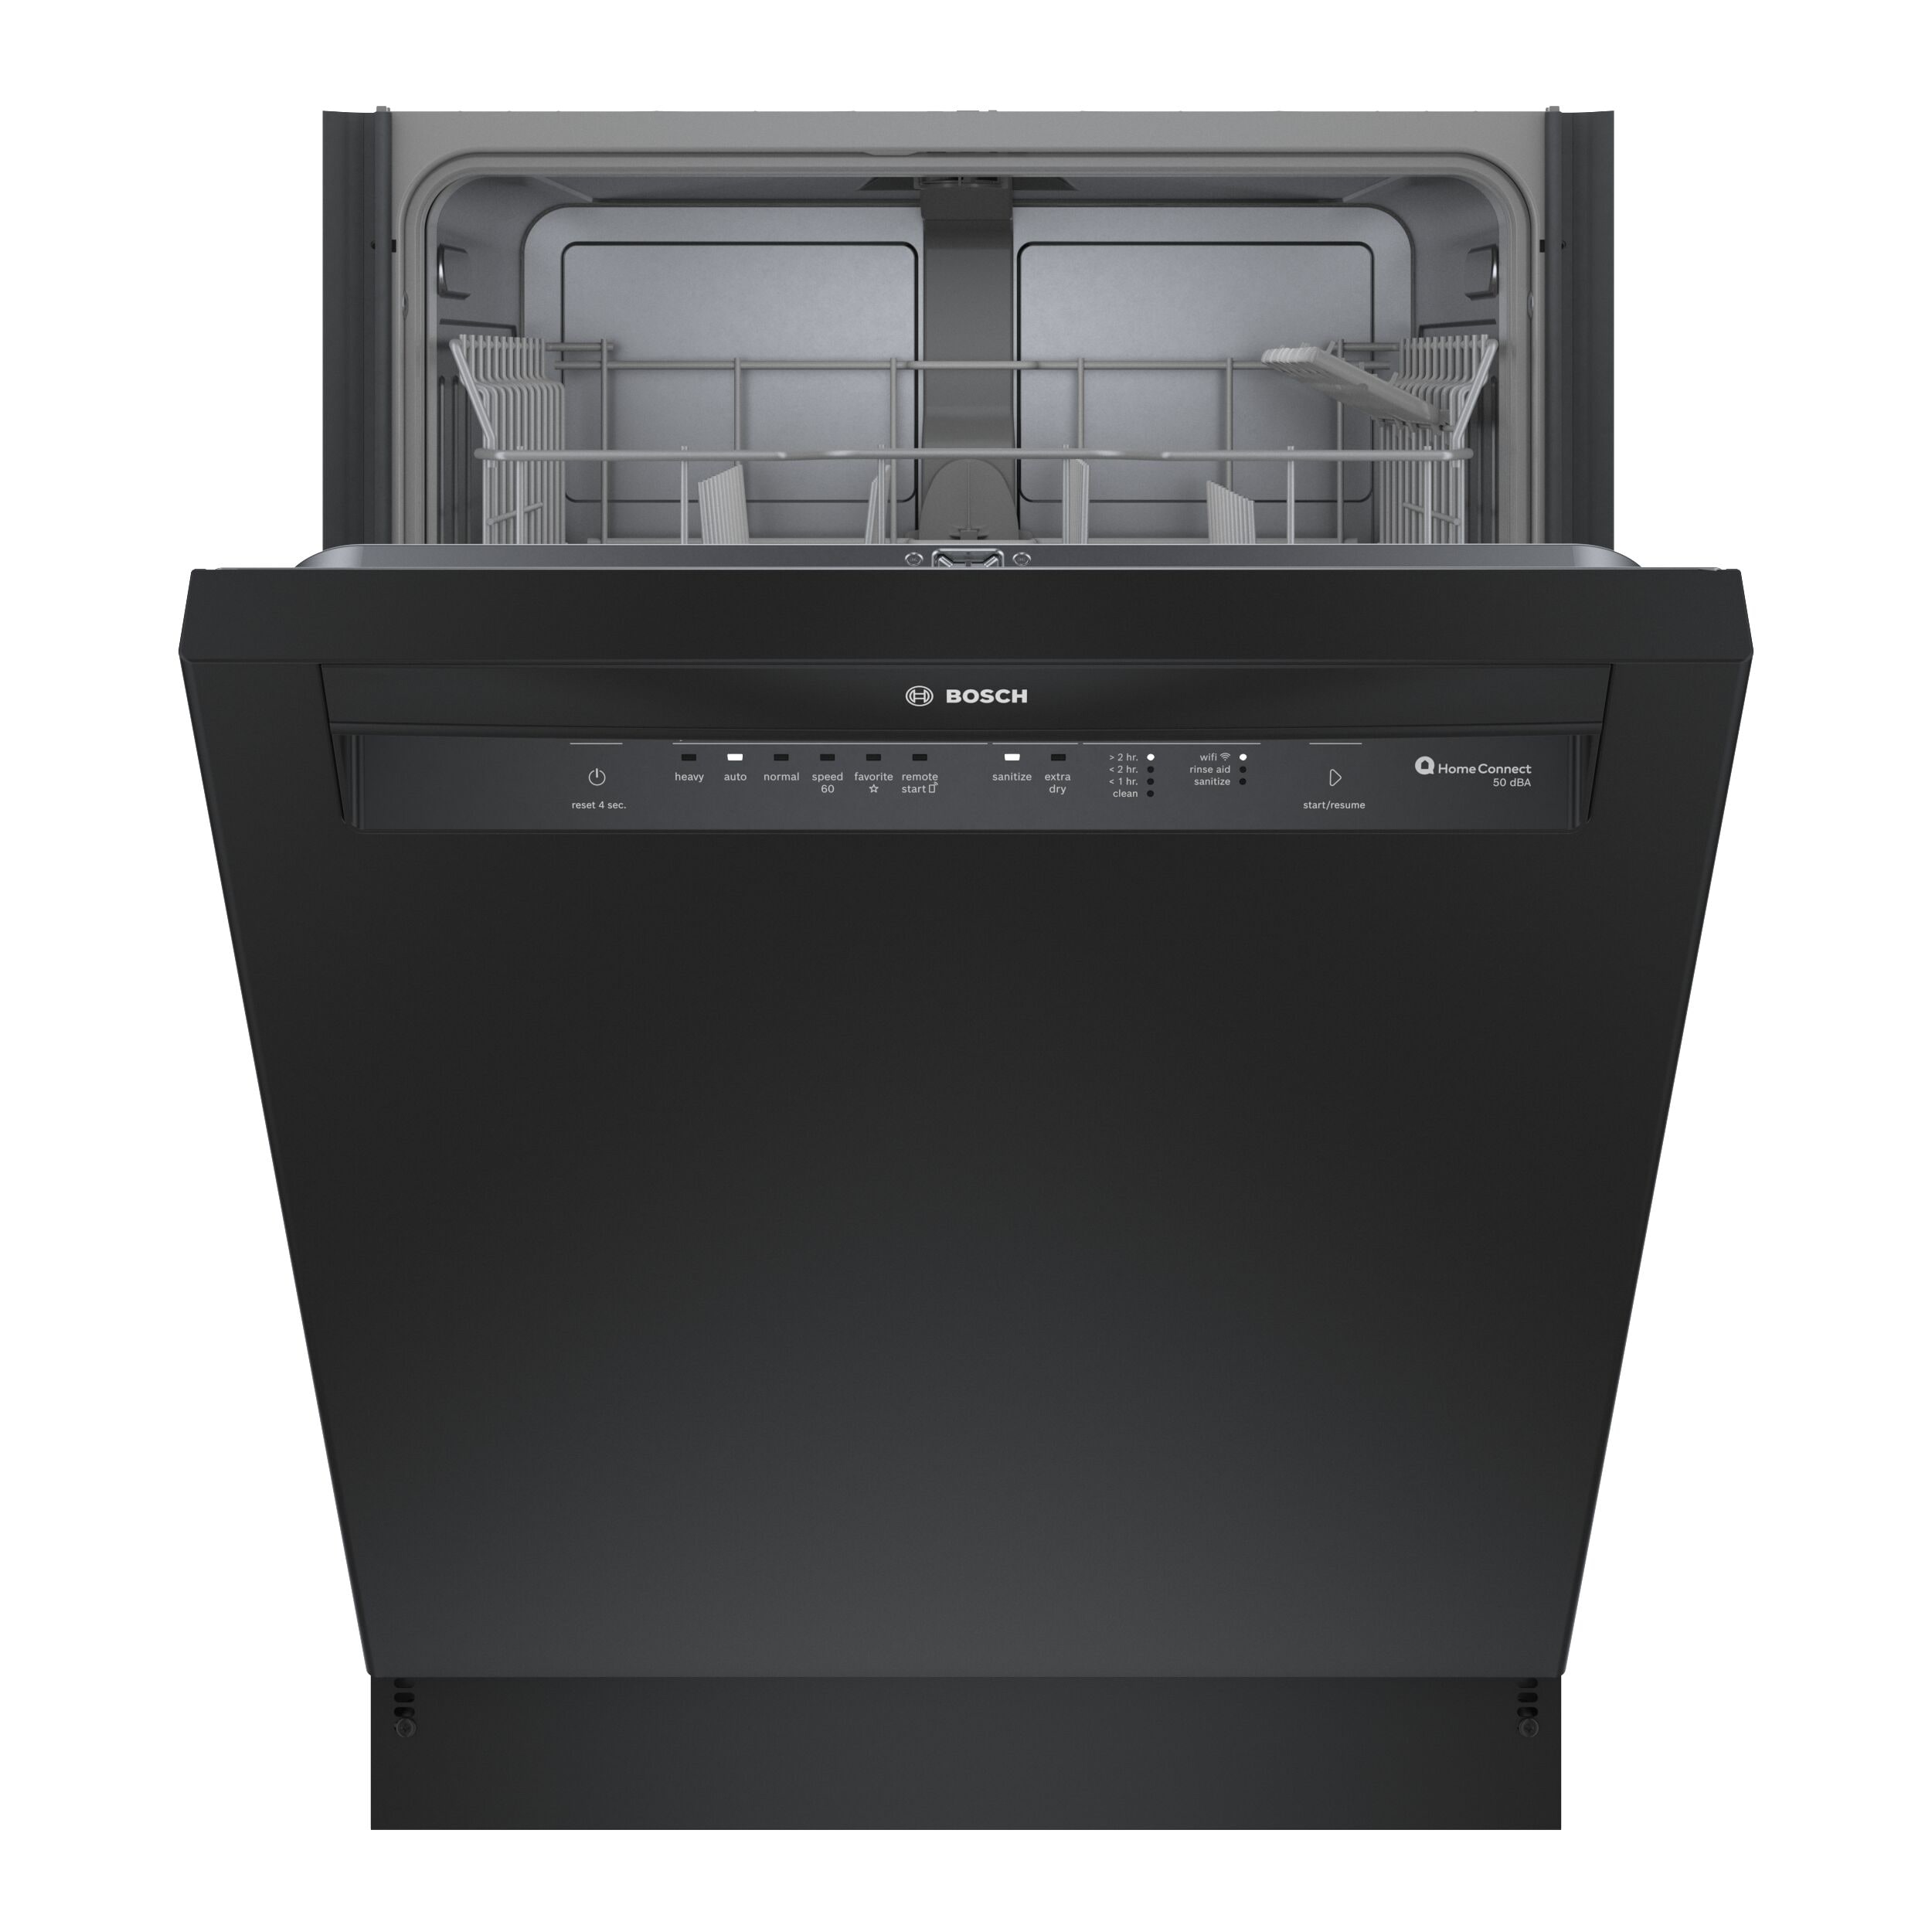 Keep Dishes Sparkling With A Wholesale lowes dishwashers sale 